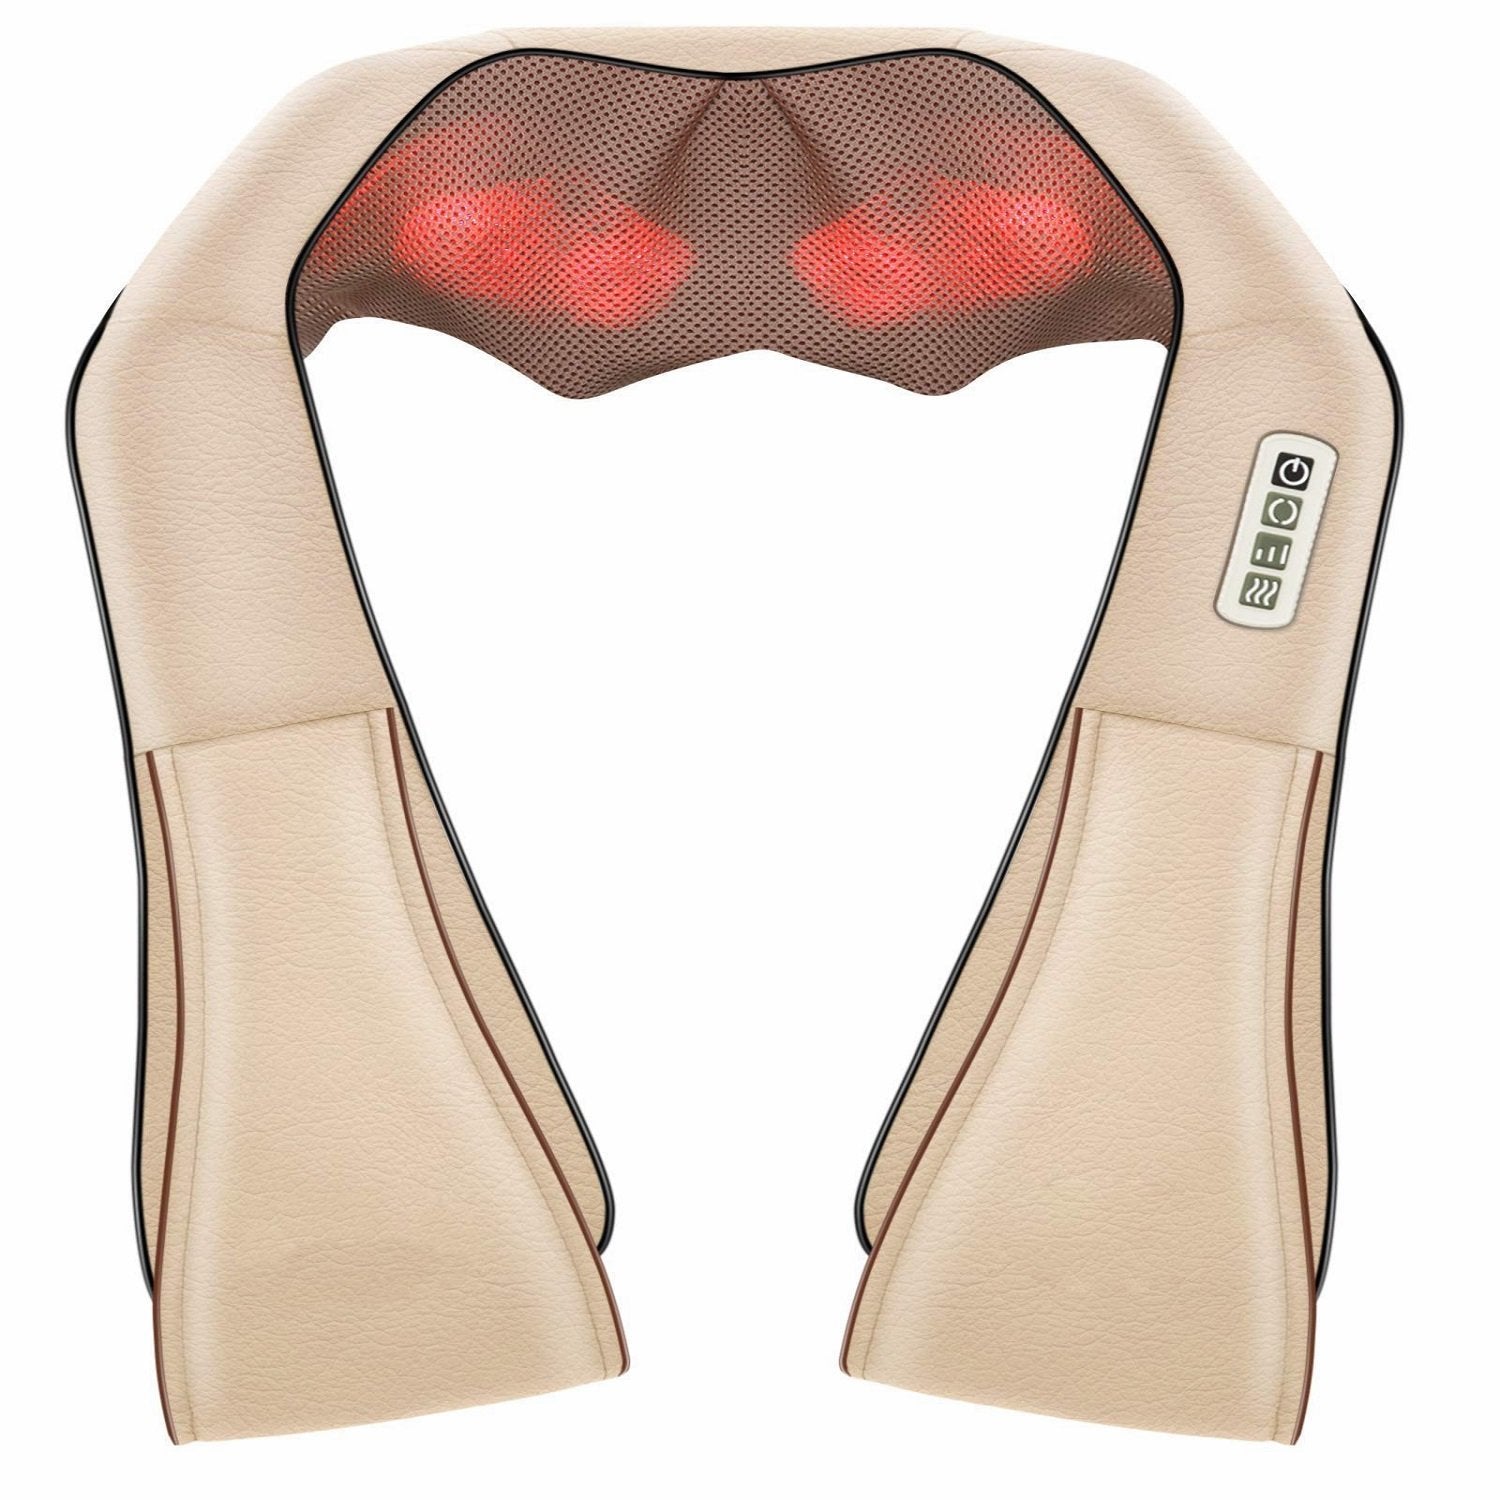 Load image into Gallery viewer, Naipo Neck and Shoulder Shiatsu Kneading Massager with Heat - Deep Tissue 3D electric Massage Pillow, Office, Home, Car, Beige - NAIPO
